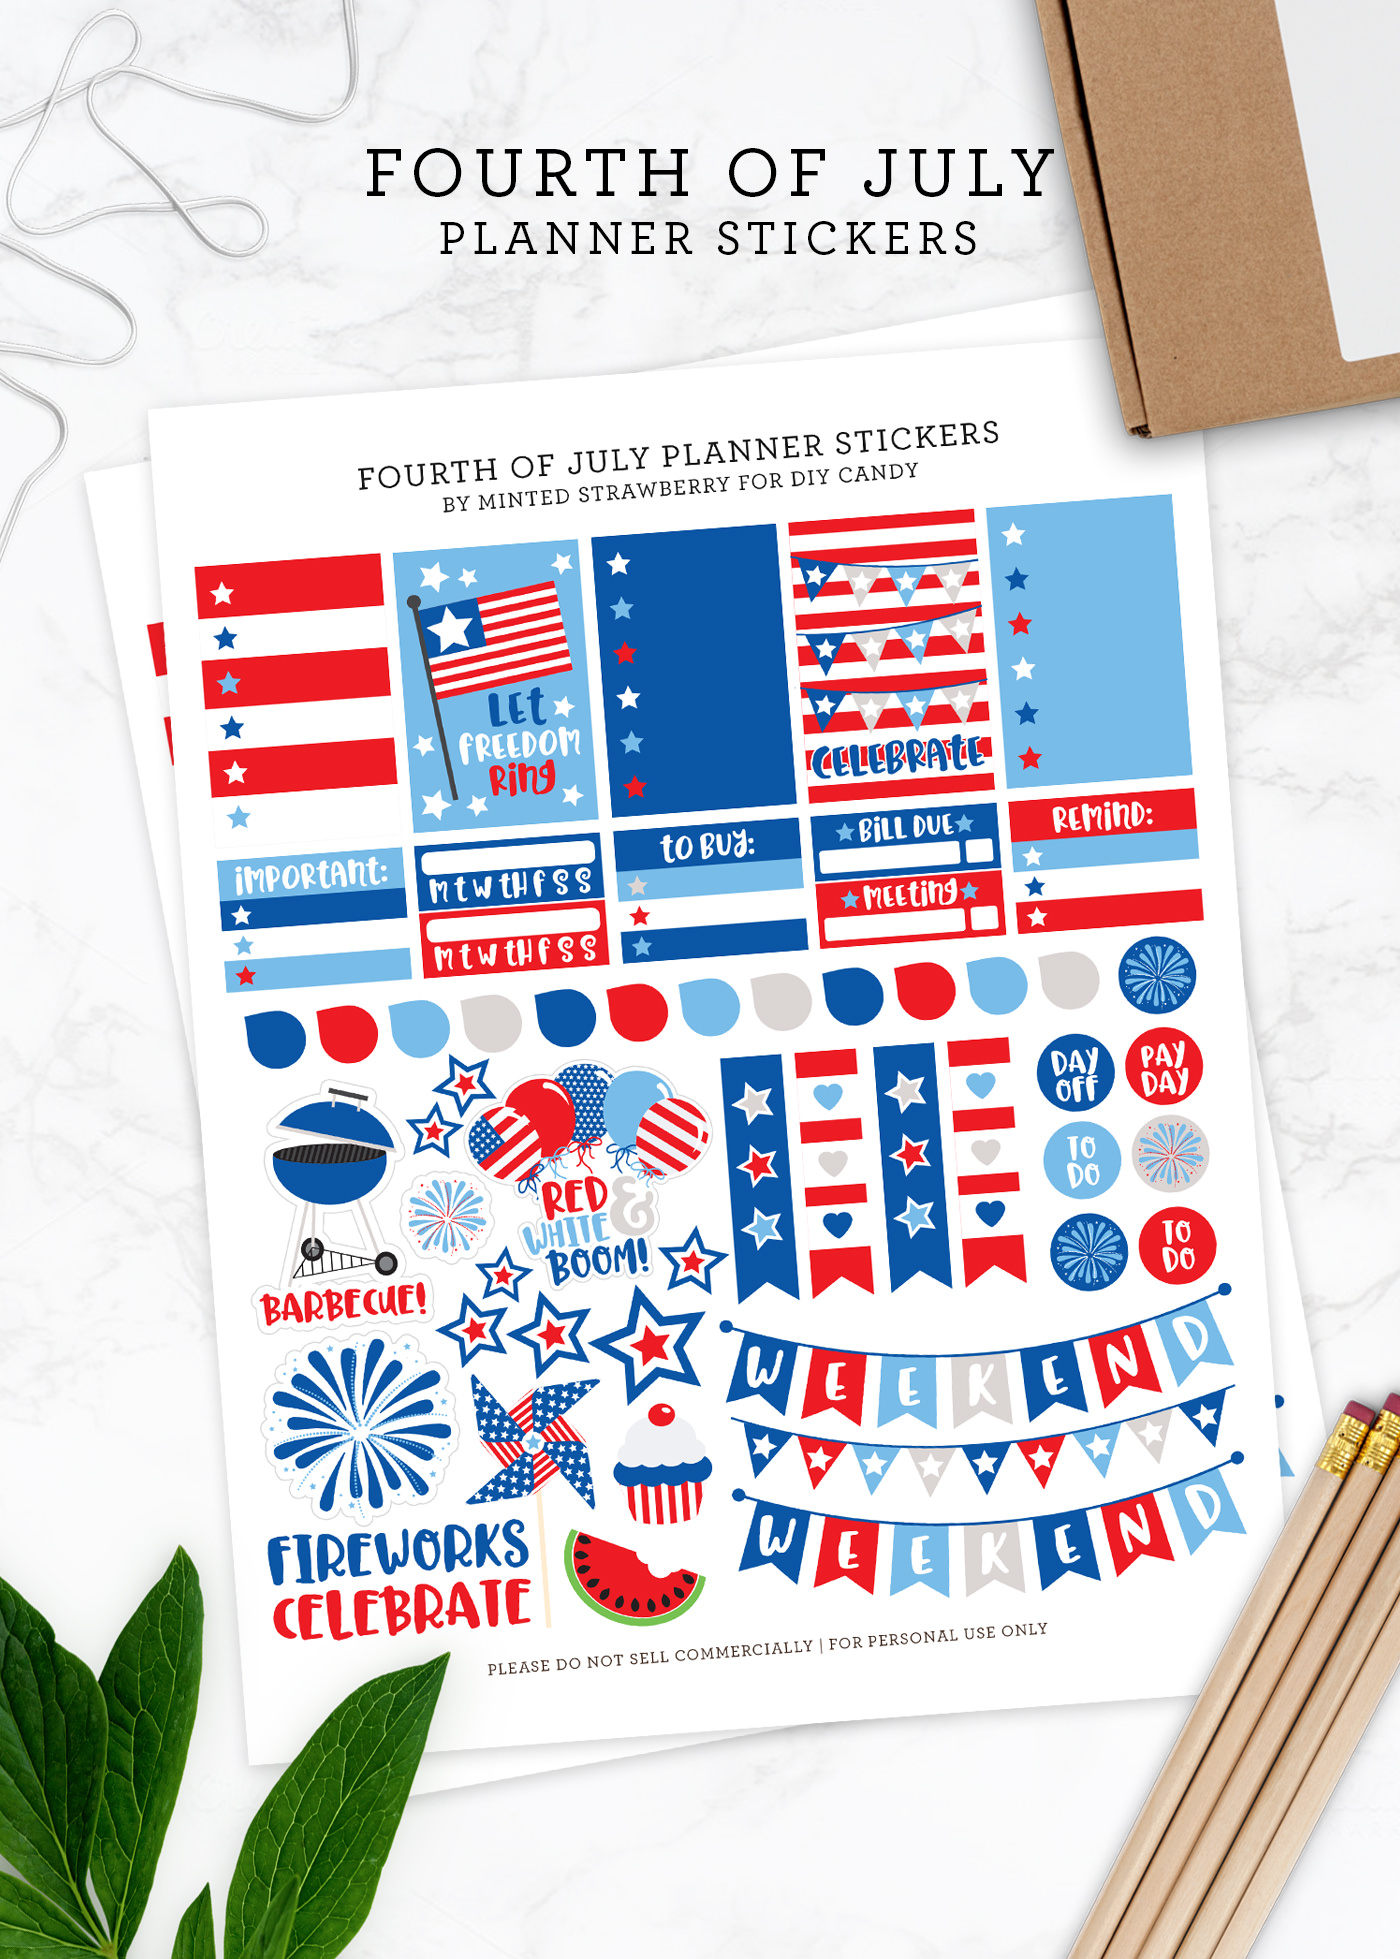 4th of july planner stickers